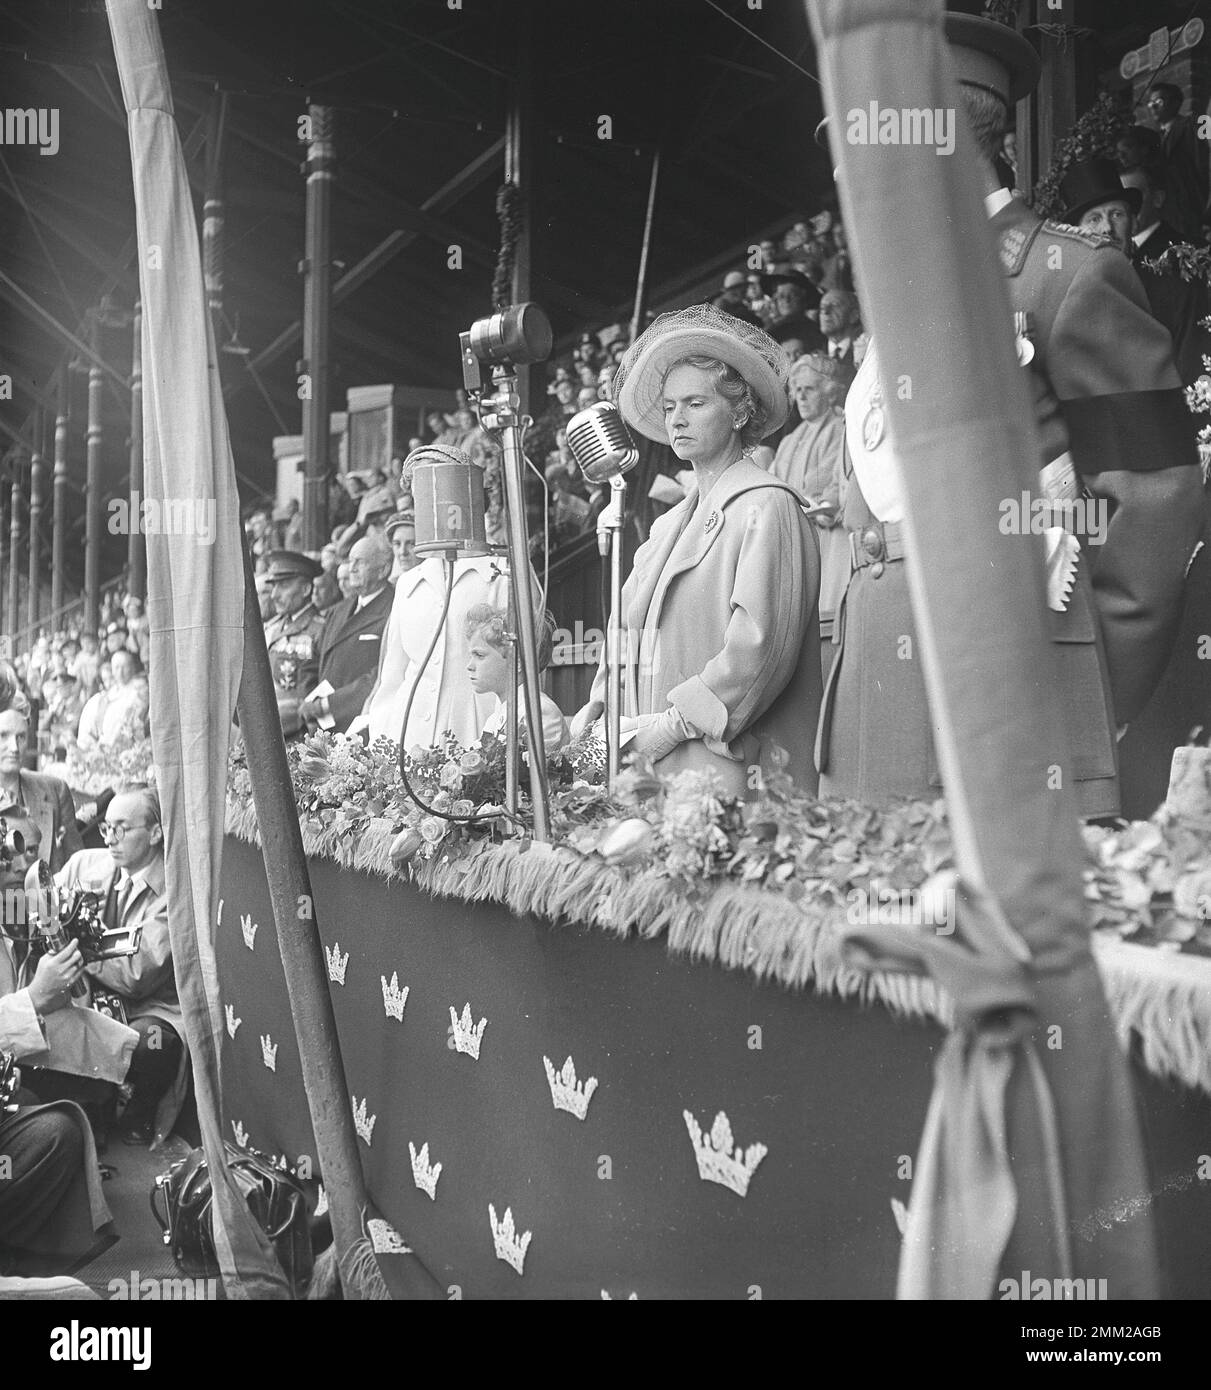 Carl XVI Gustaf, King of Sweden. Born 30 april 1946. Sports event at Stockholm's Stadium 1951 where the participants enter the arena and the audience stands up to get a better view. Prince Carl Gustaf with his mother Sibylla and hidden behind a pillar King Gustaf the VI Adolf. Kristoffersson ref BC52-9 Stock Photo